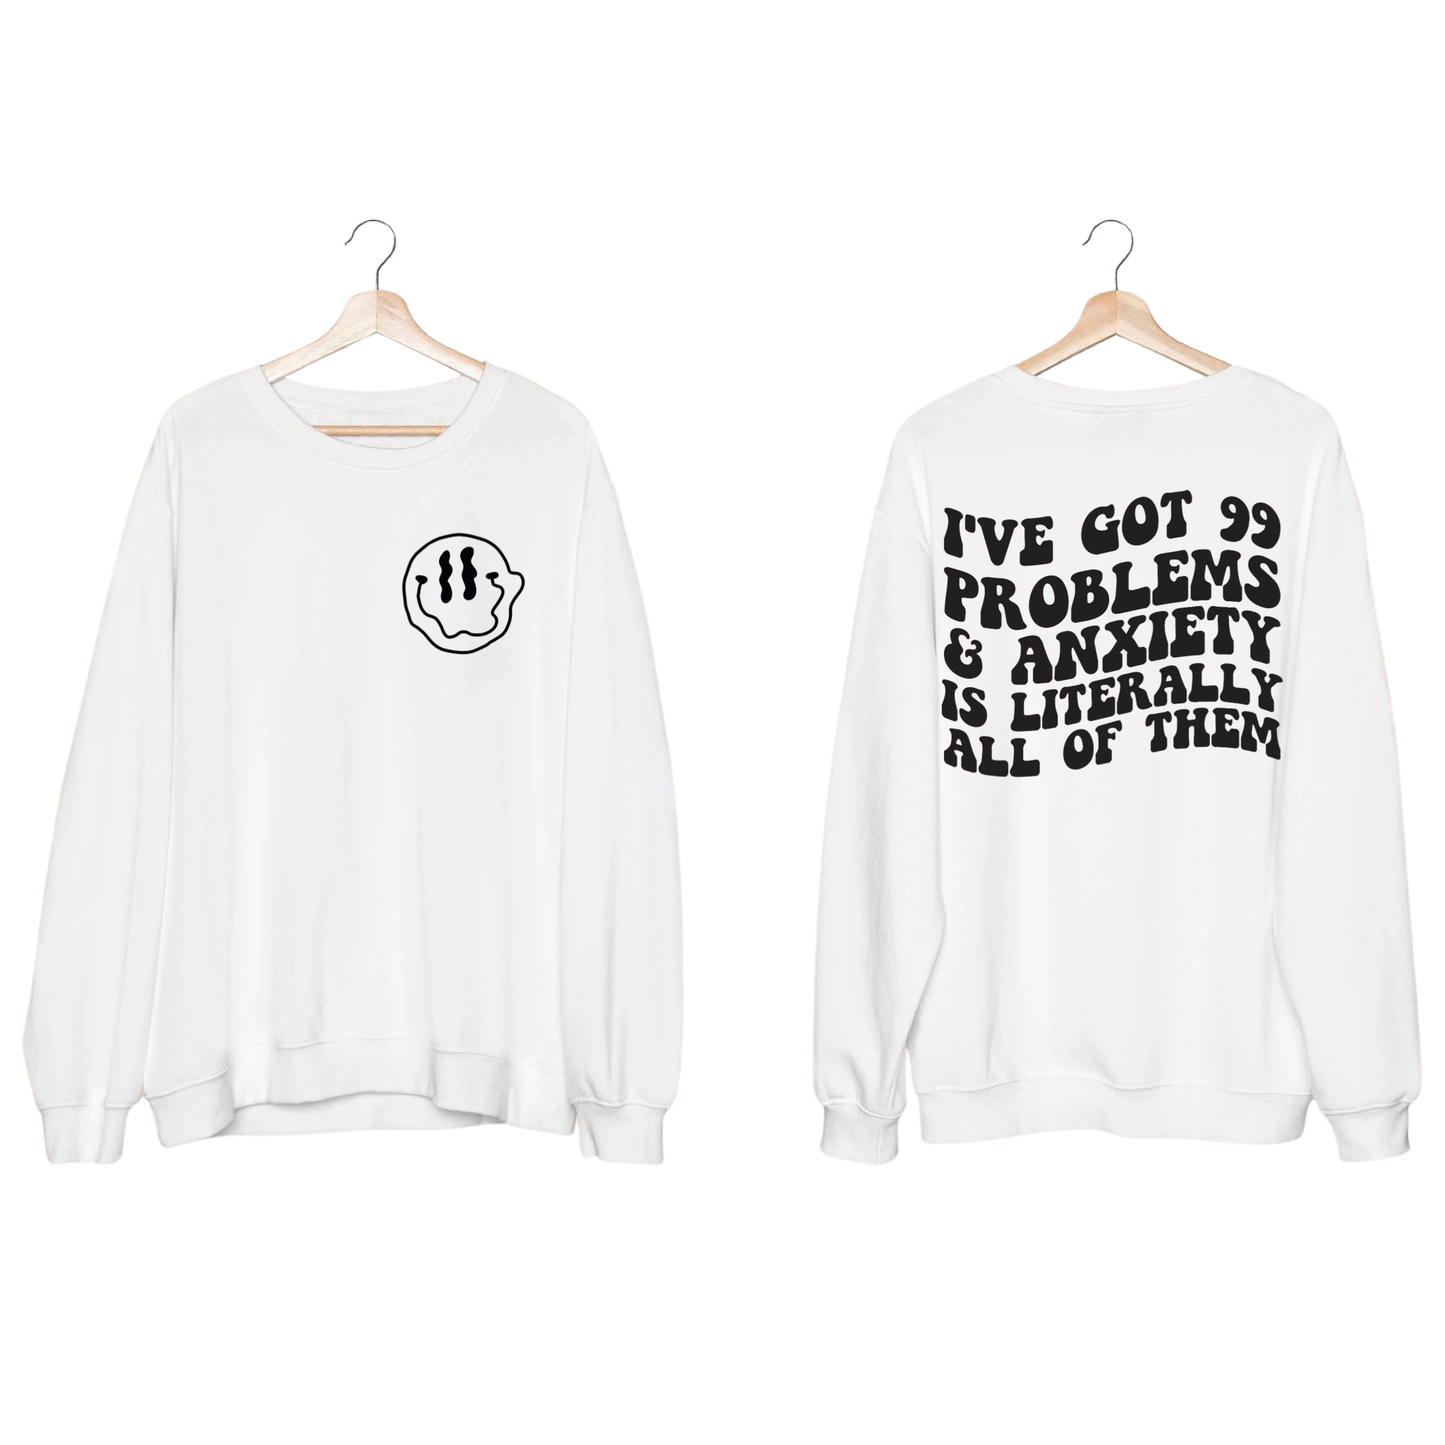 I got 99 problems & anxiety is literally all of them Crewneck